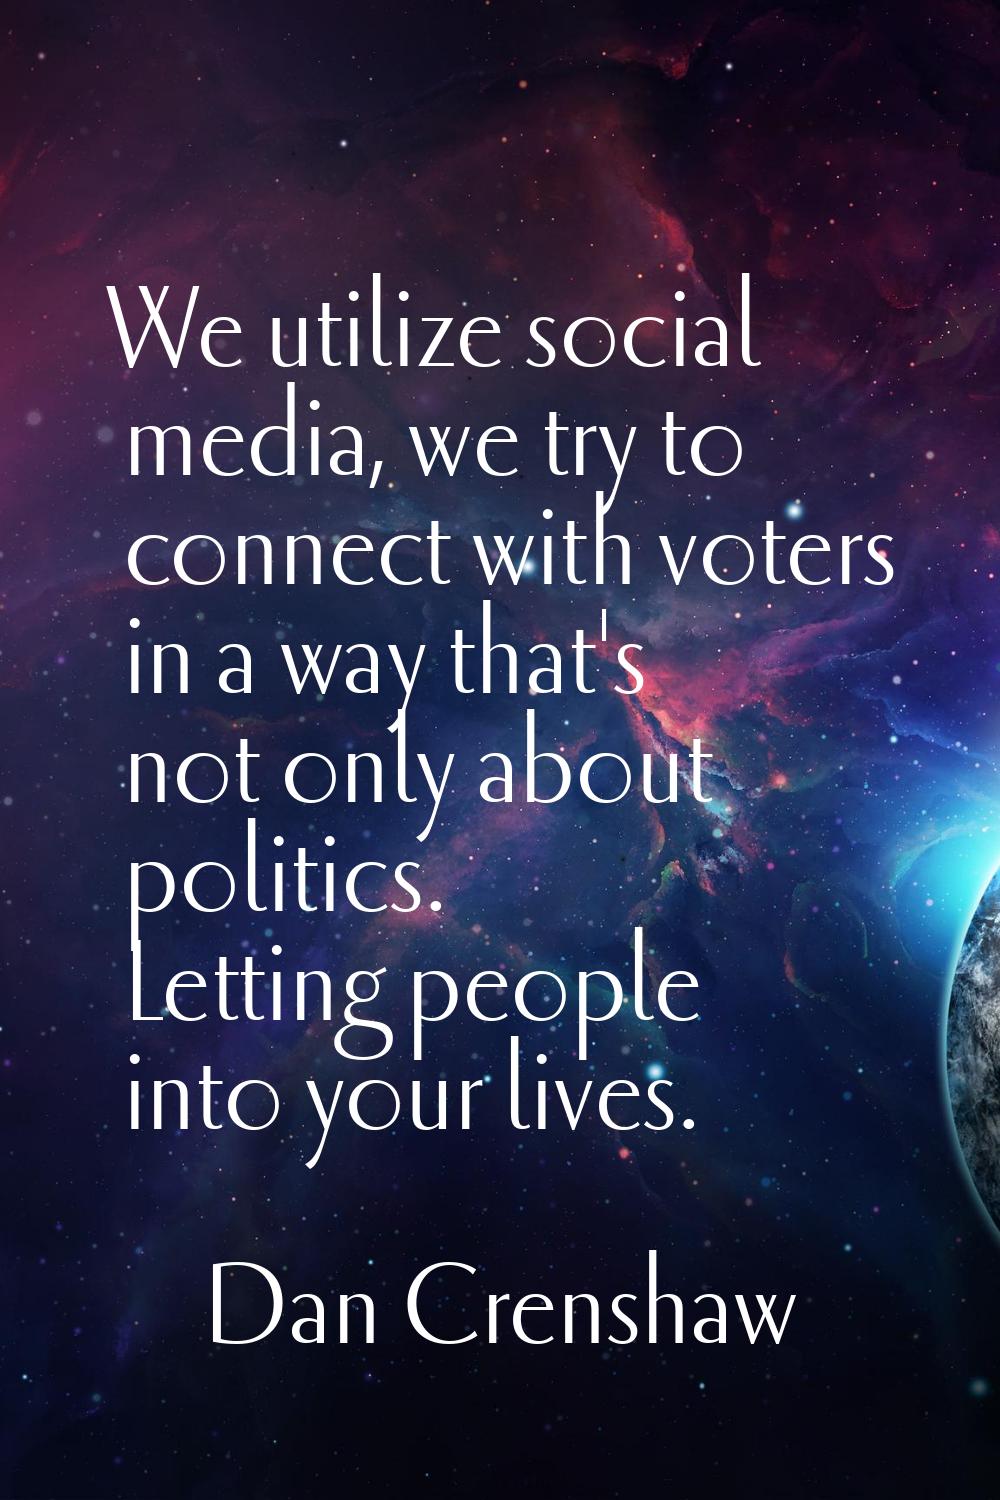 We utilize social media, we try to connect with voters in a way that's not only about politics. Let